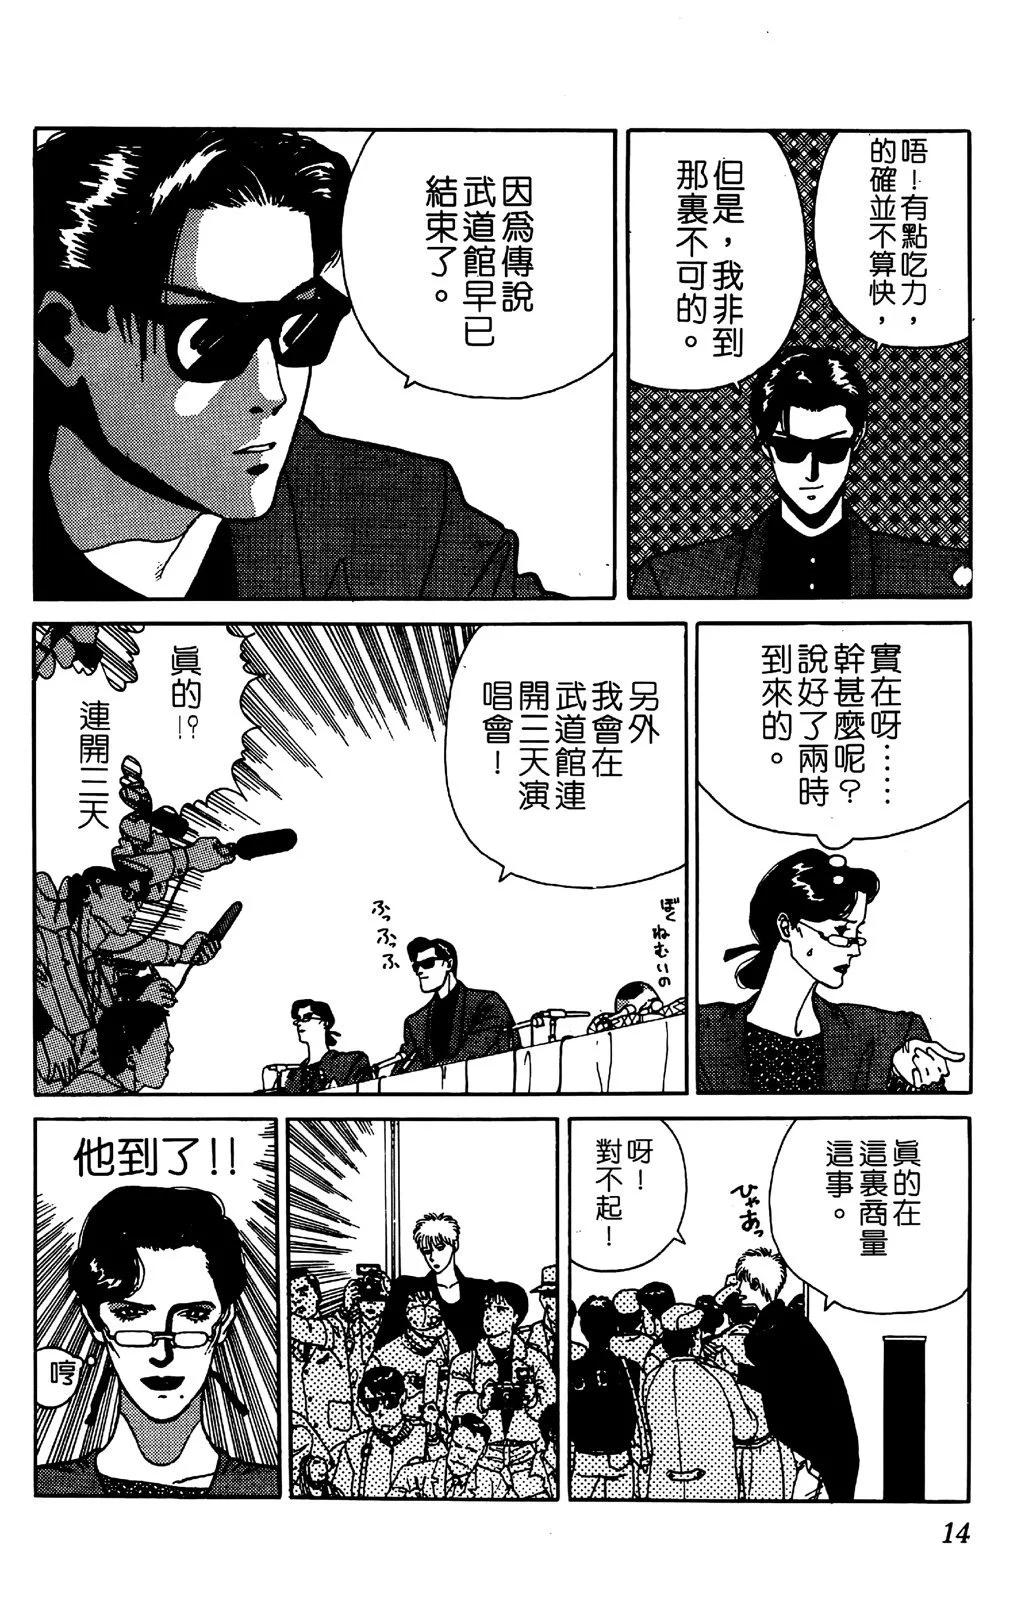 TO-Y - 第05卷(1/4) - 1